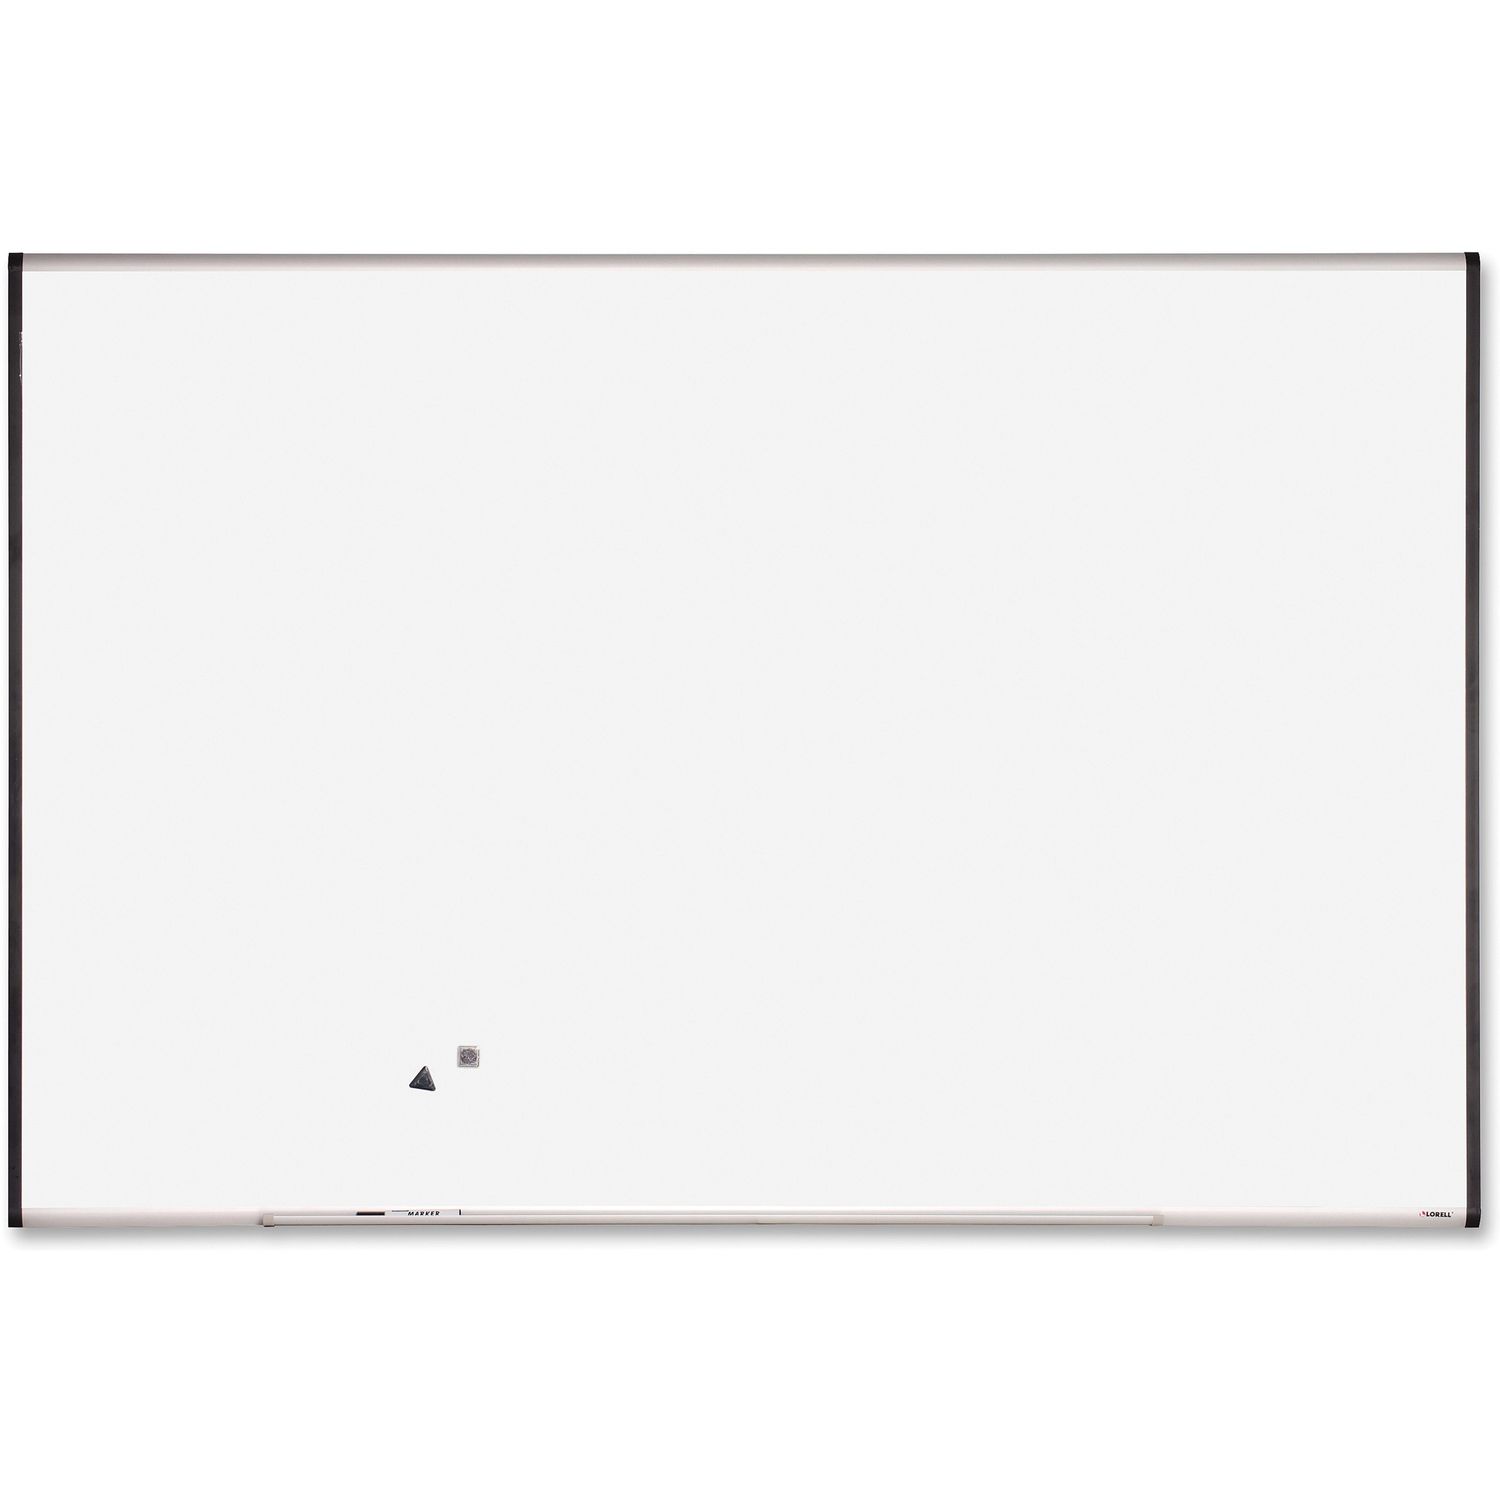 Signature Series Magnetic Dry-erase Boards 72" (6 ft) Width x 48" (4 ft) Height, Coated Steel Surface, Silver, Ebony Frame, 1 Each